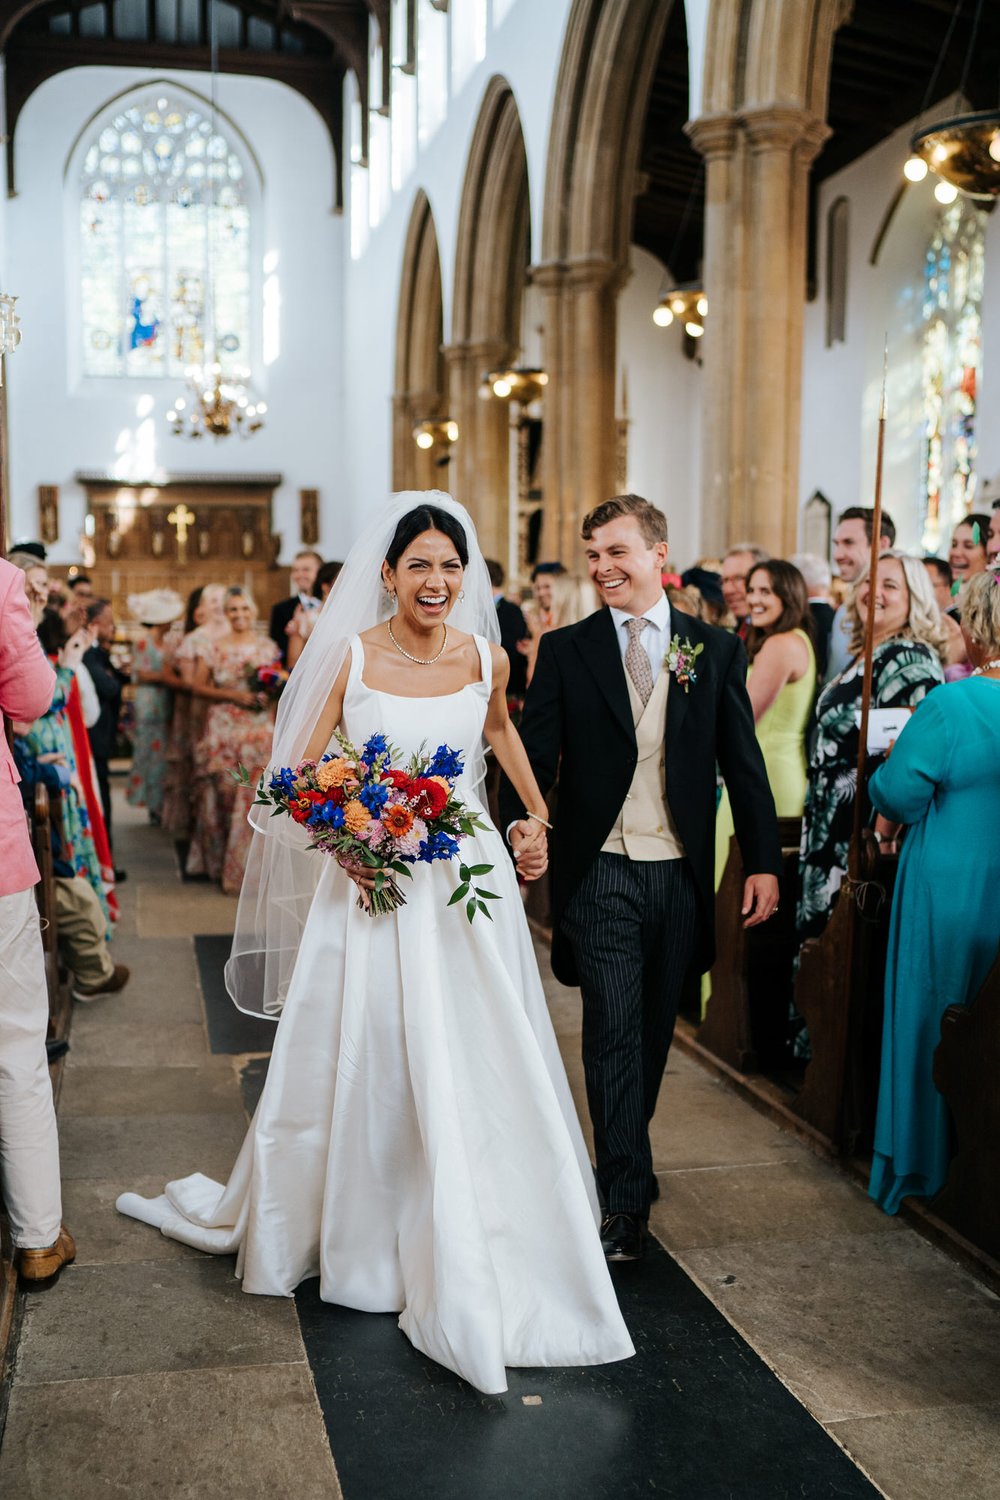 Bride and groom smile as they exit the church they just got married in, both smiling